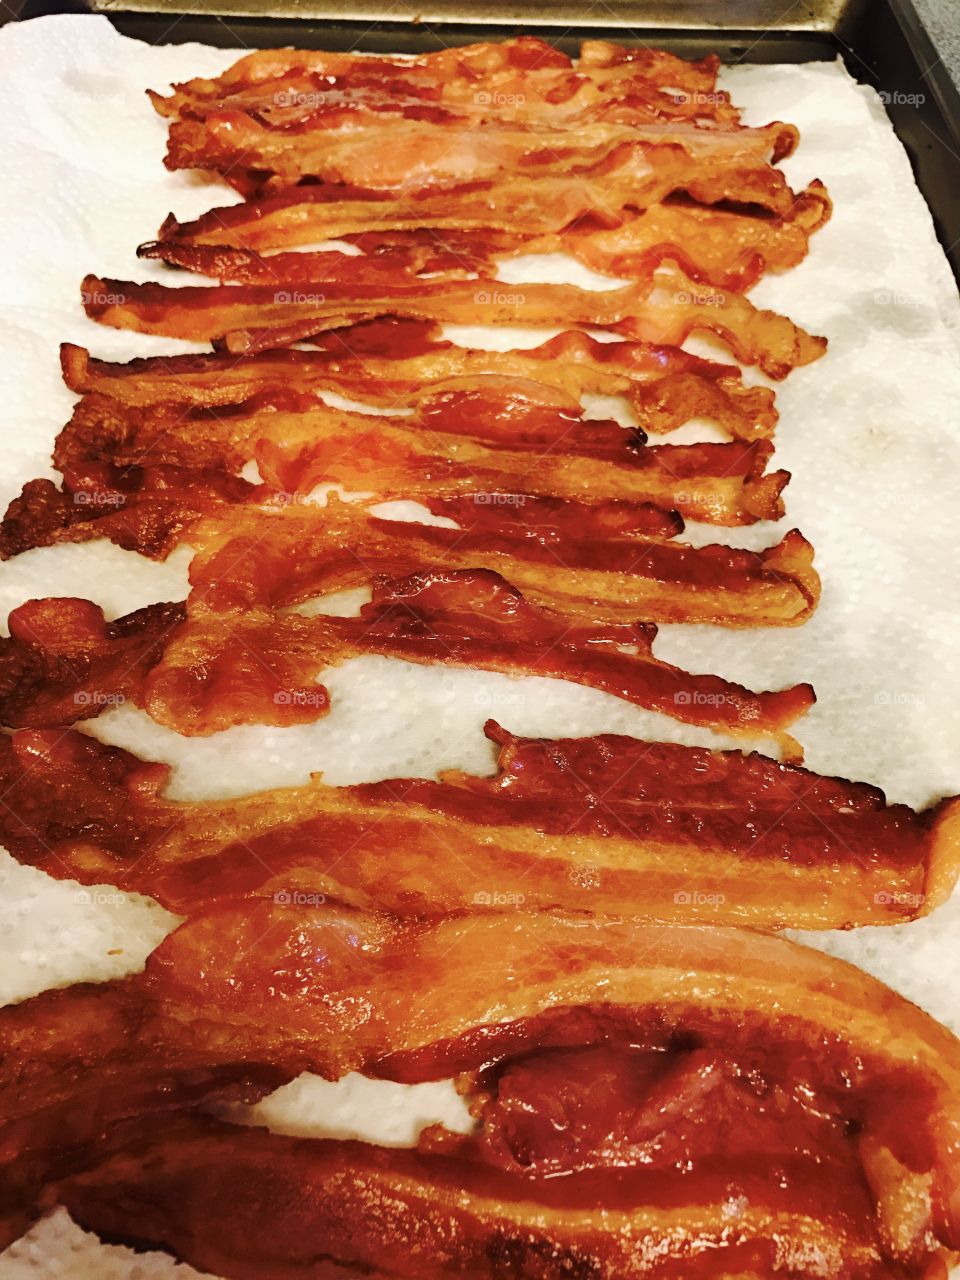 You can never have too much bacon